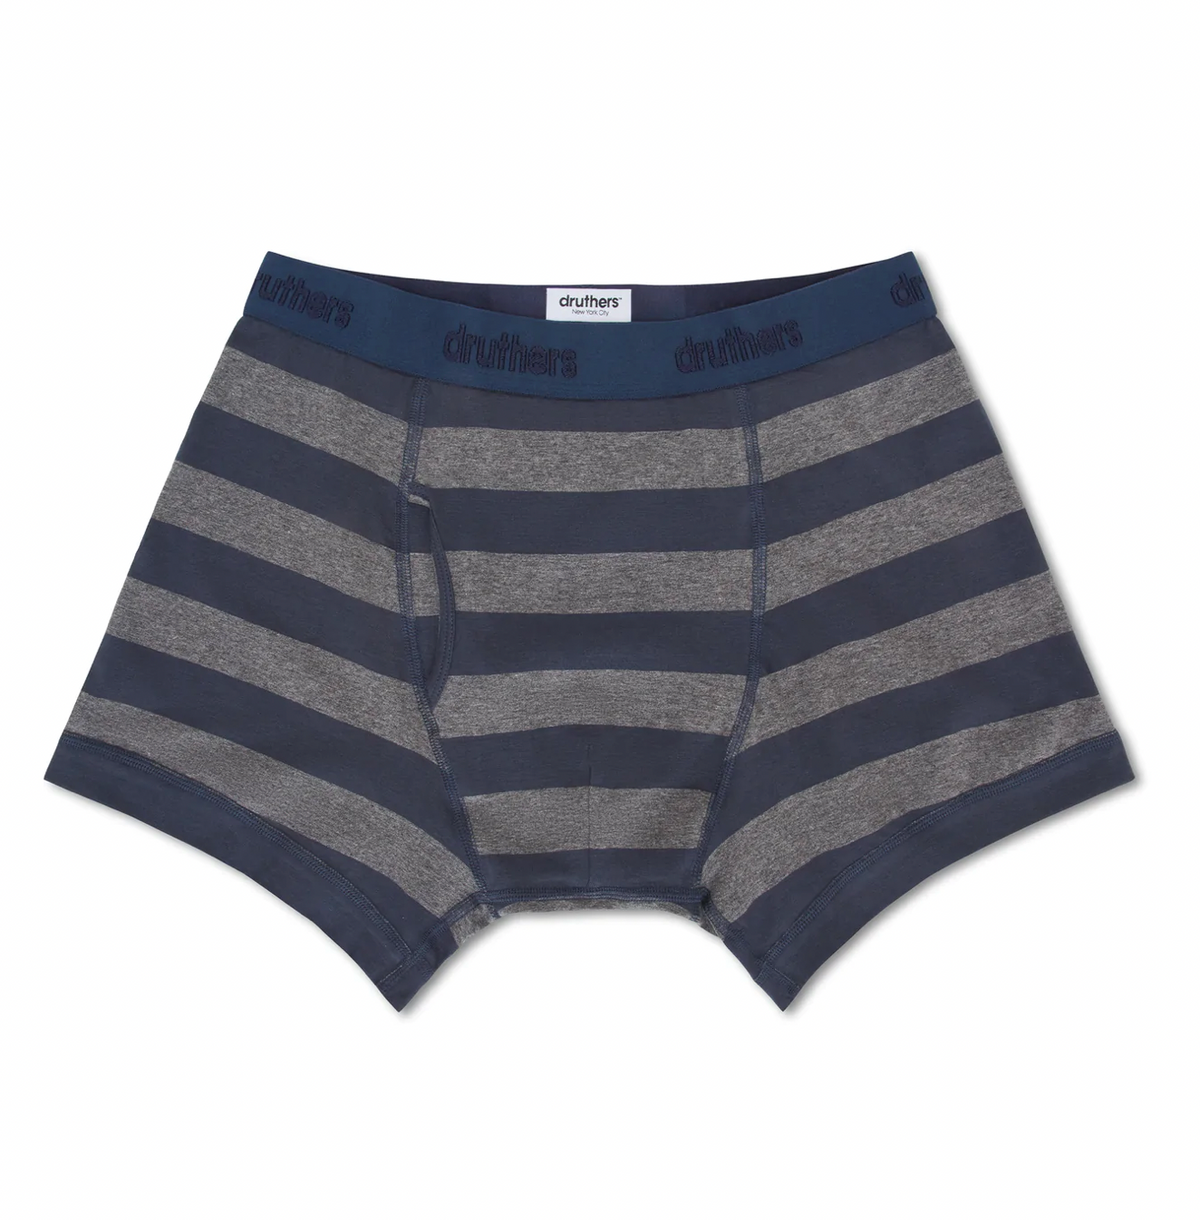 Organic Cotton Boxer Briefs in Charcoal Navy Stripe